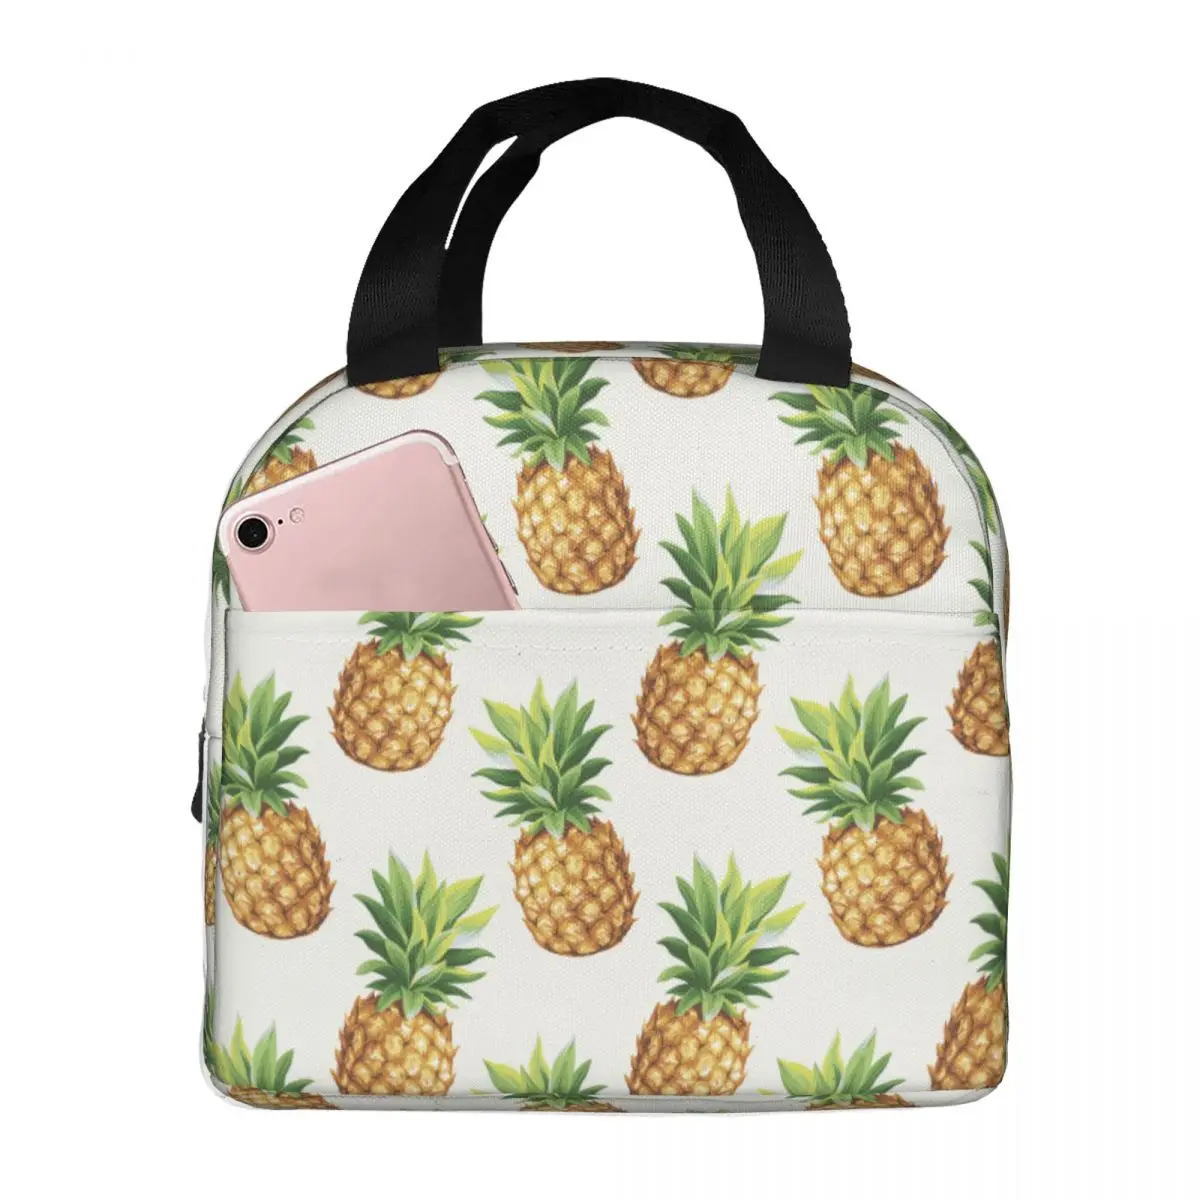 Pineapple Lunch Bag Portable Insulated Canvas Cooler Bag Cute Fruit Thermal Food Picnic Travel Lunch Box for Women Girl